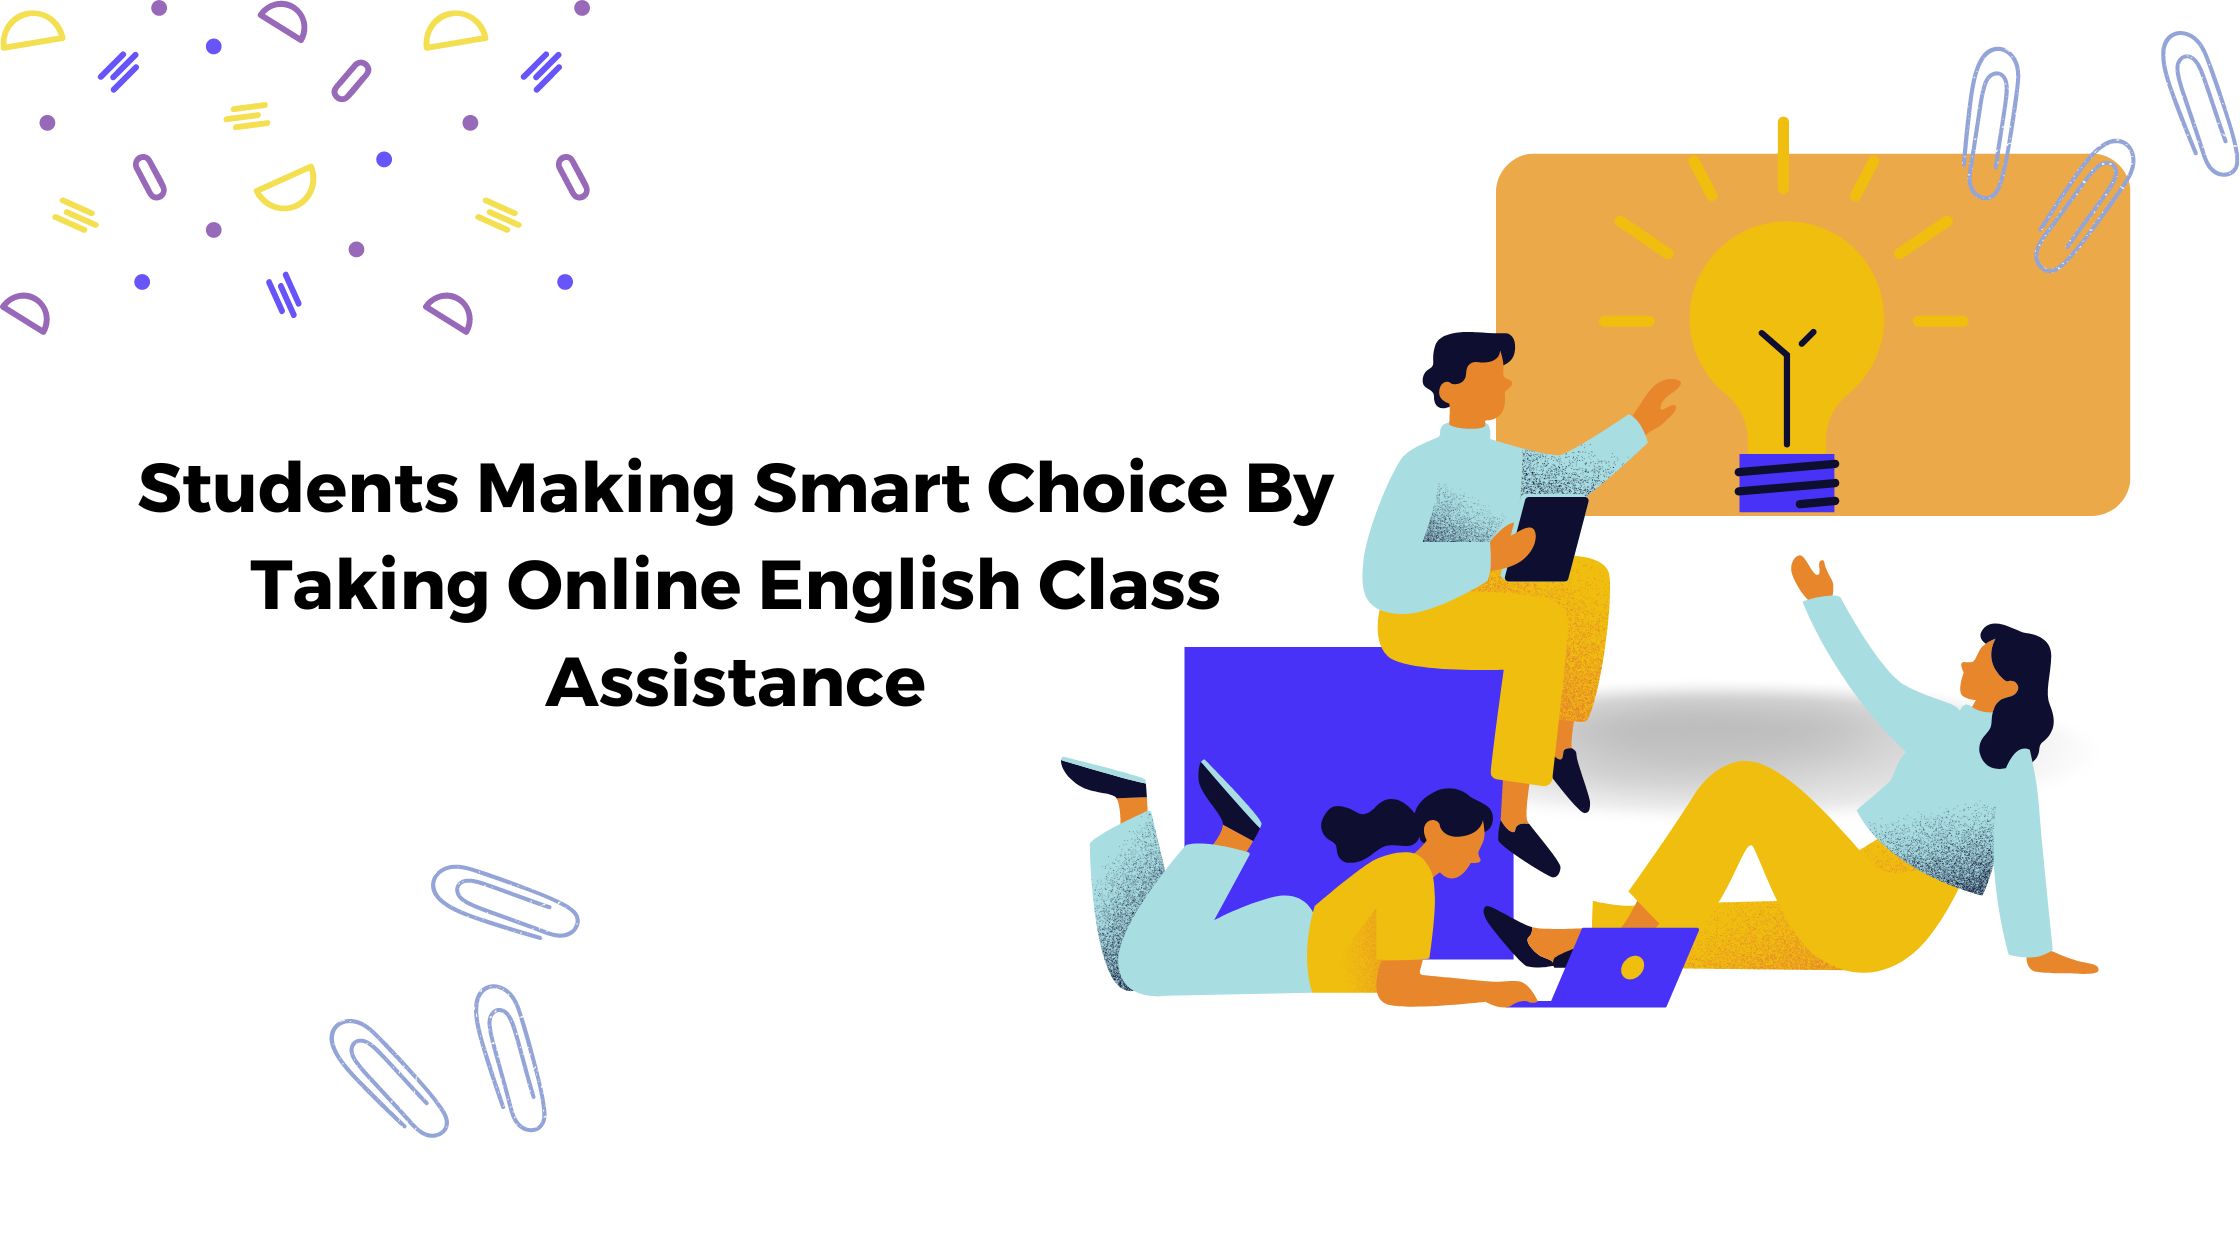 Students Making Smart Choice By Taking Online English Class Assistance